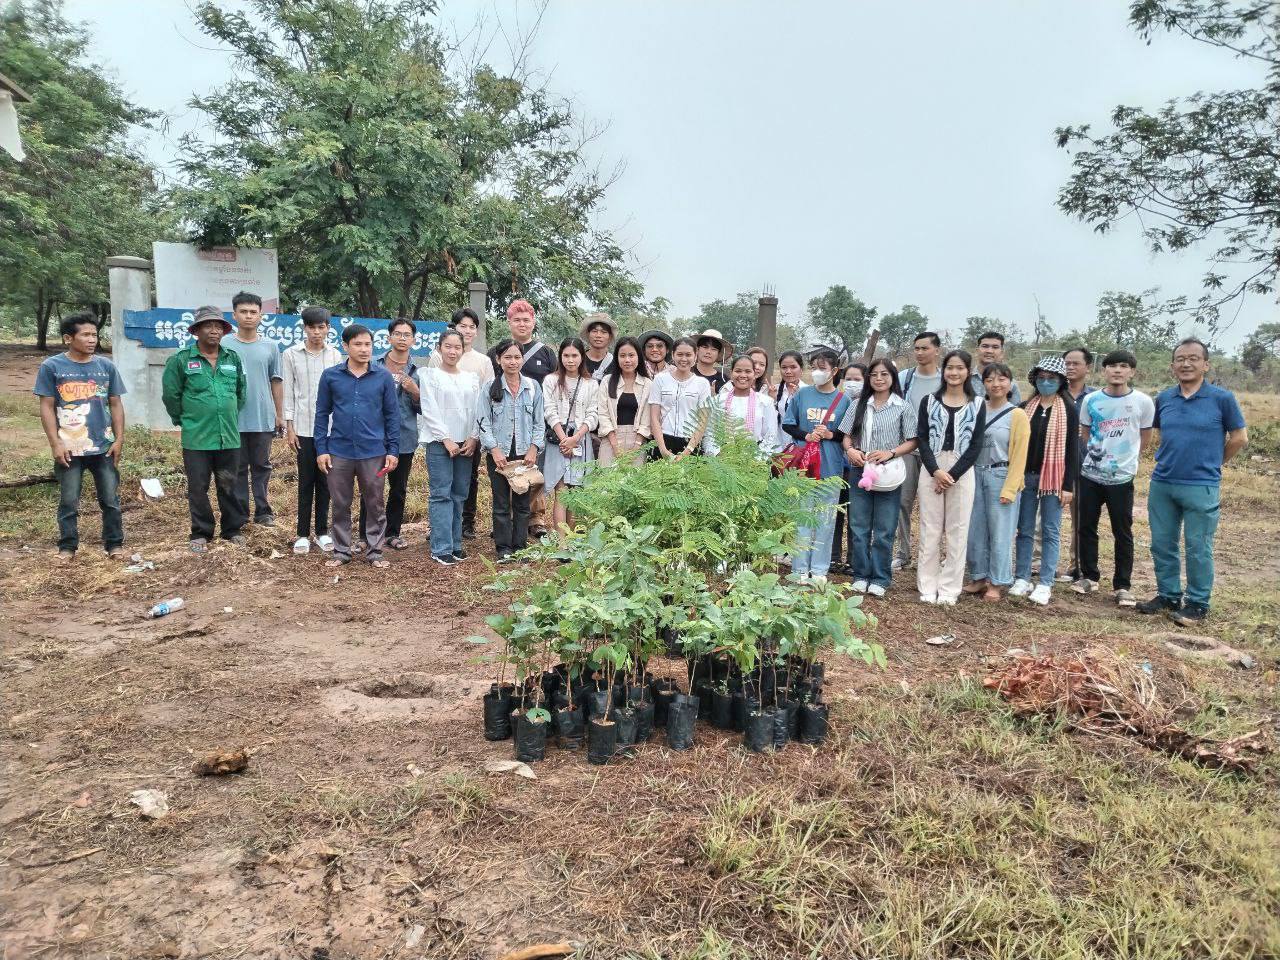 Group photo of tree-planting participants